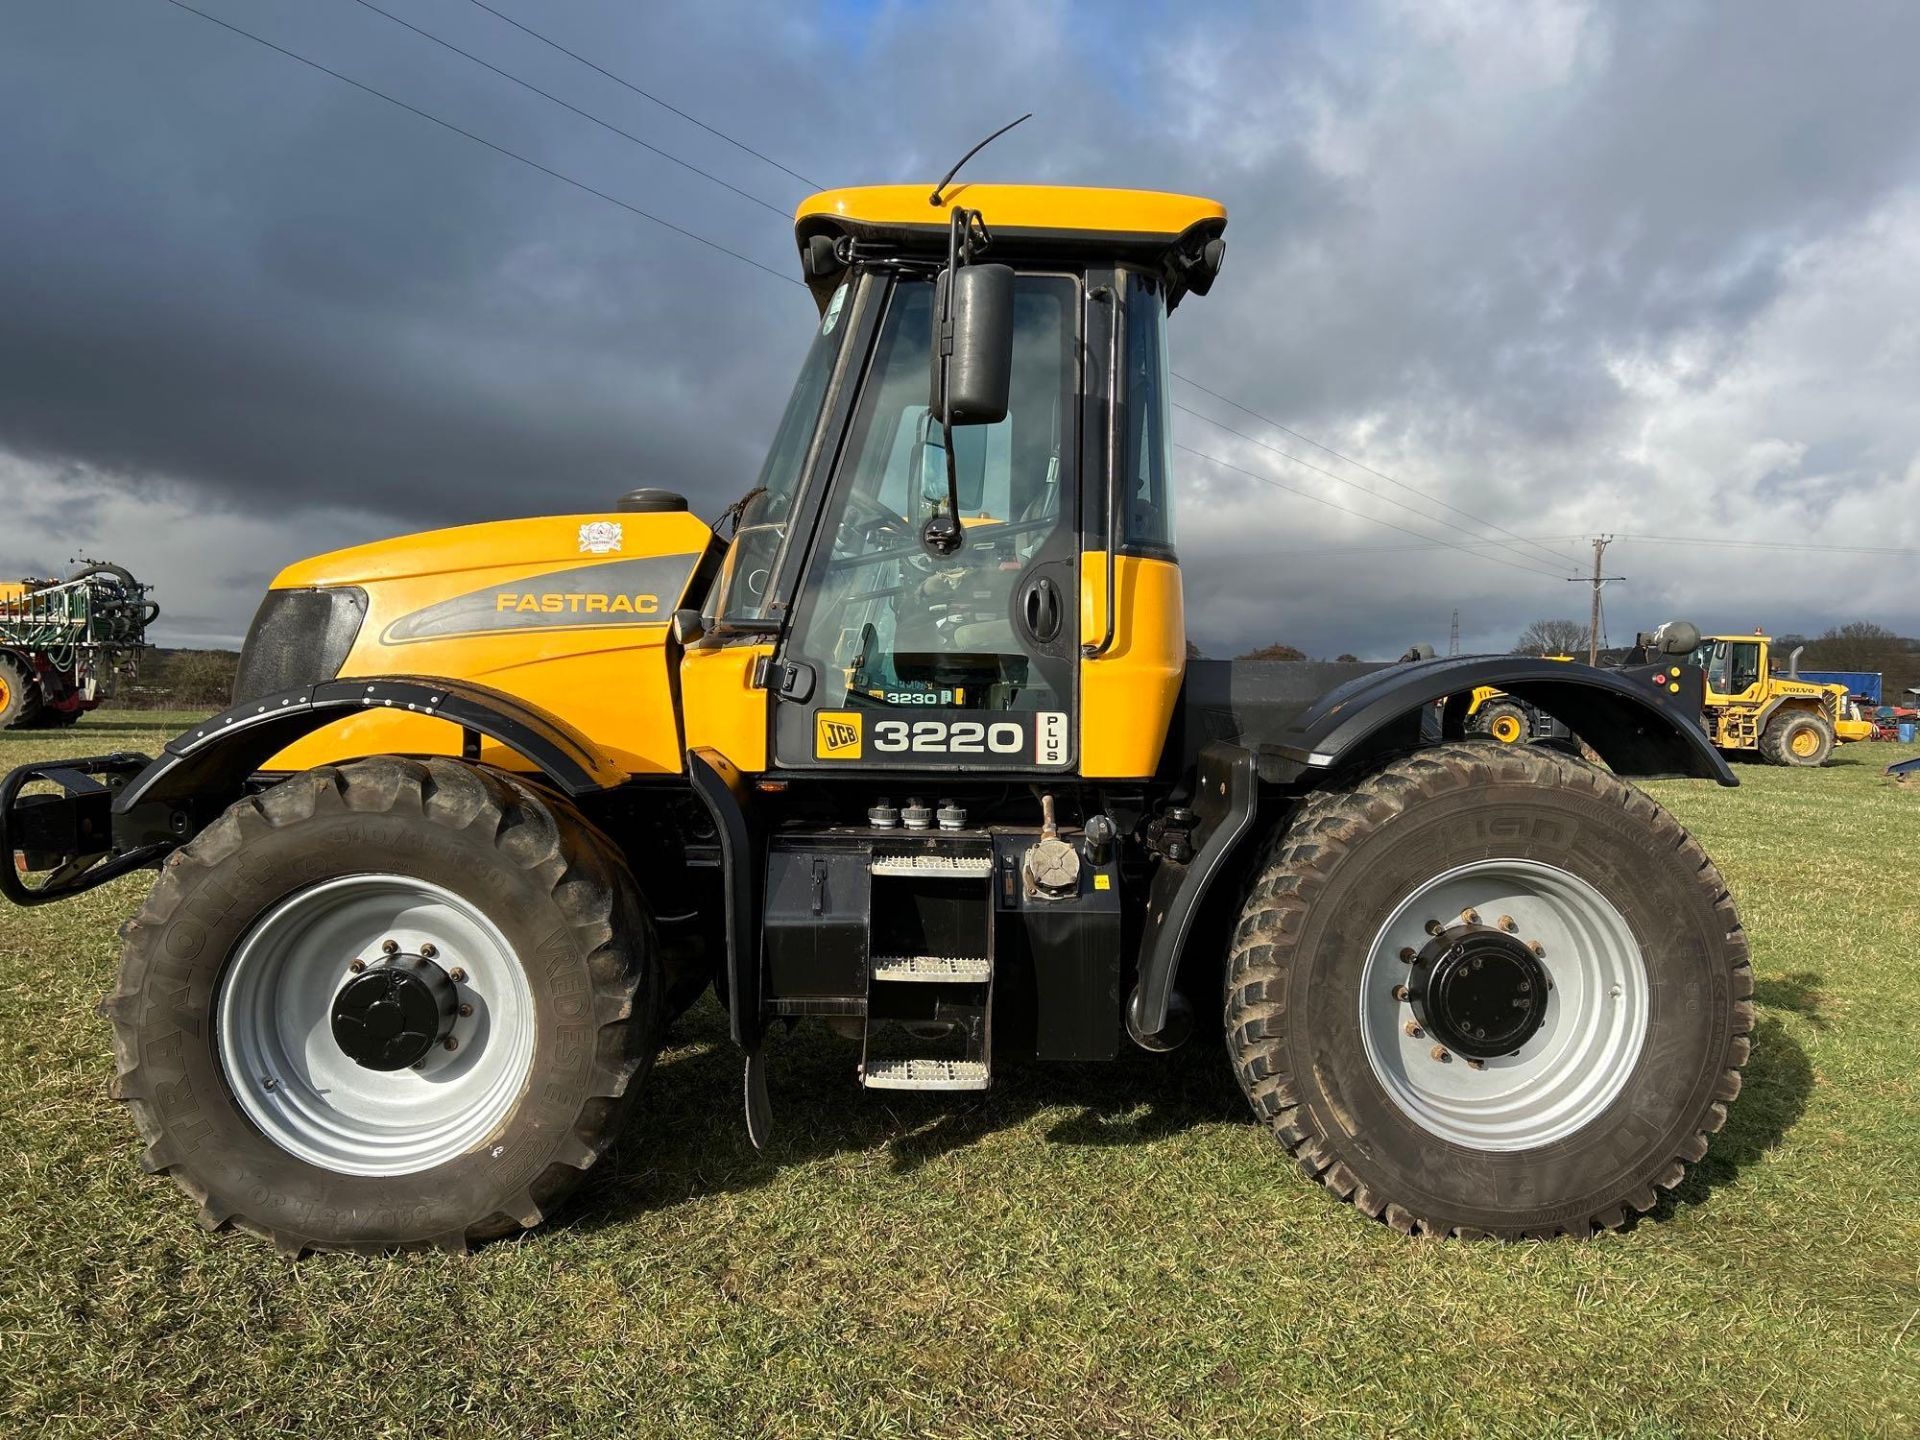 2006 JCB Fastrac 3220 with plus pack, 65kph, 3 rear spool valves. Datatagged. On Firestone 540/65R30 - Image 2 of 11